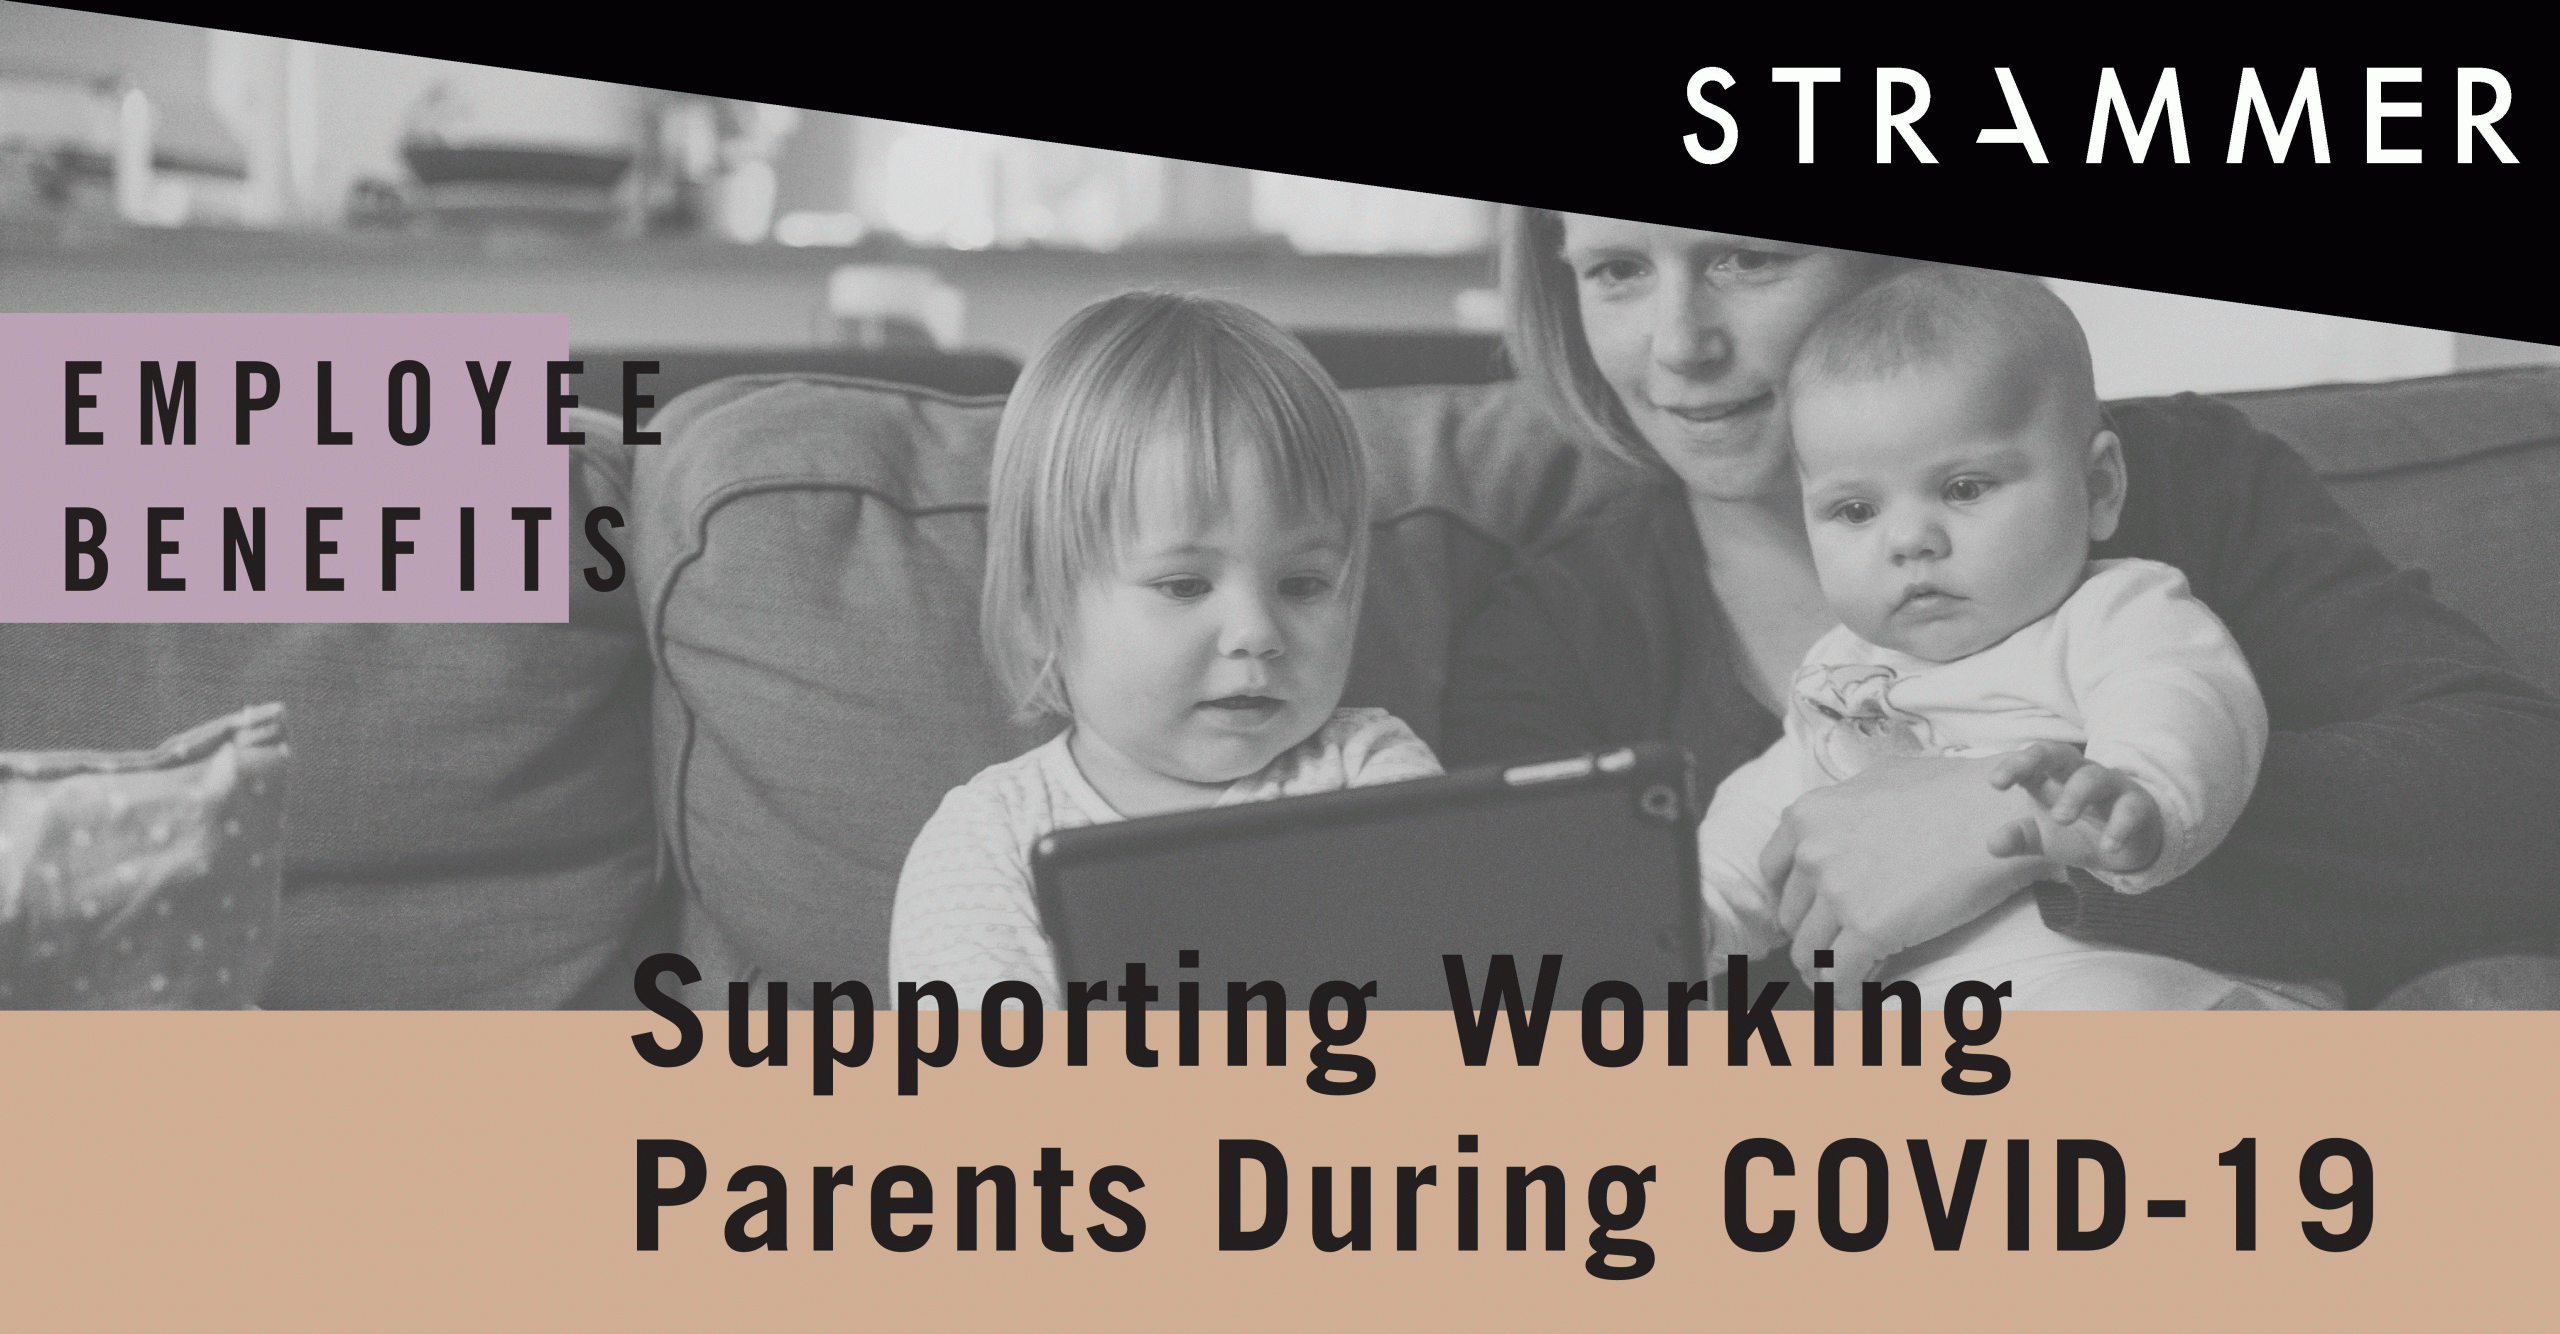 How To Support Working Parents Amidst Coronavirus